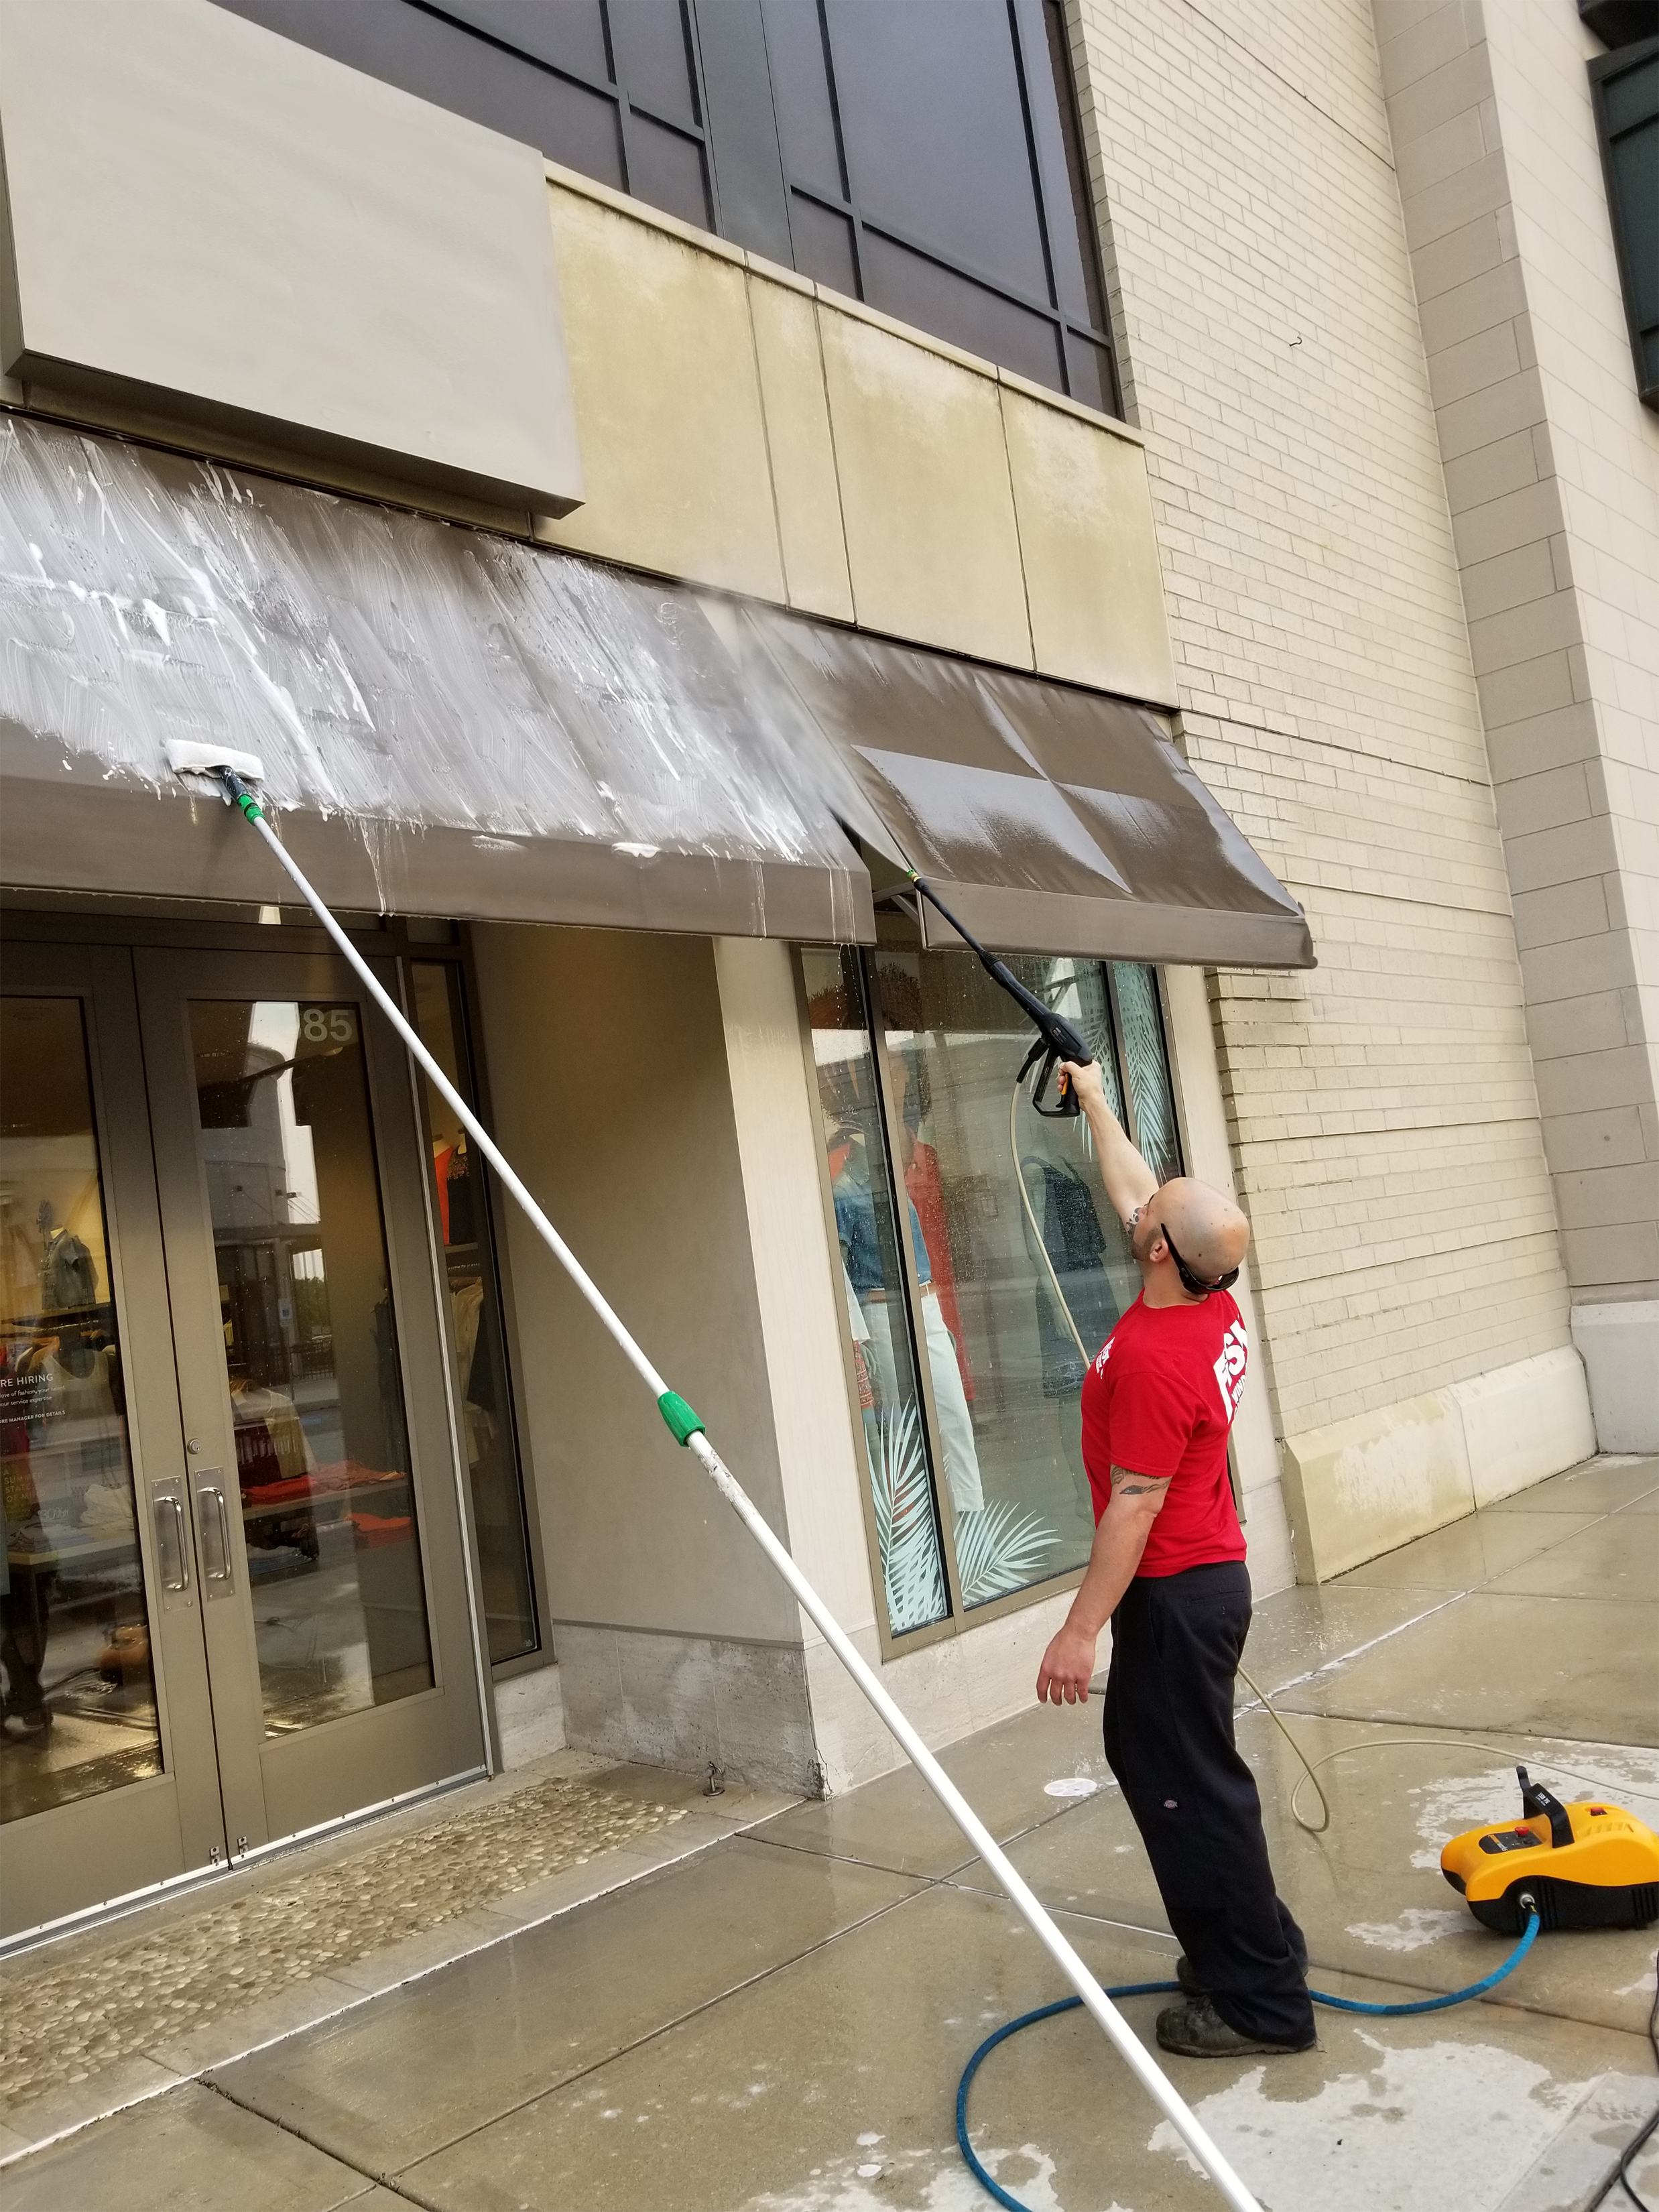 Image of Fish Window Cleaner Cleaning Storefront Awnings